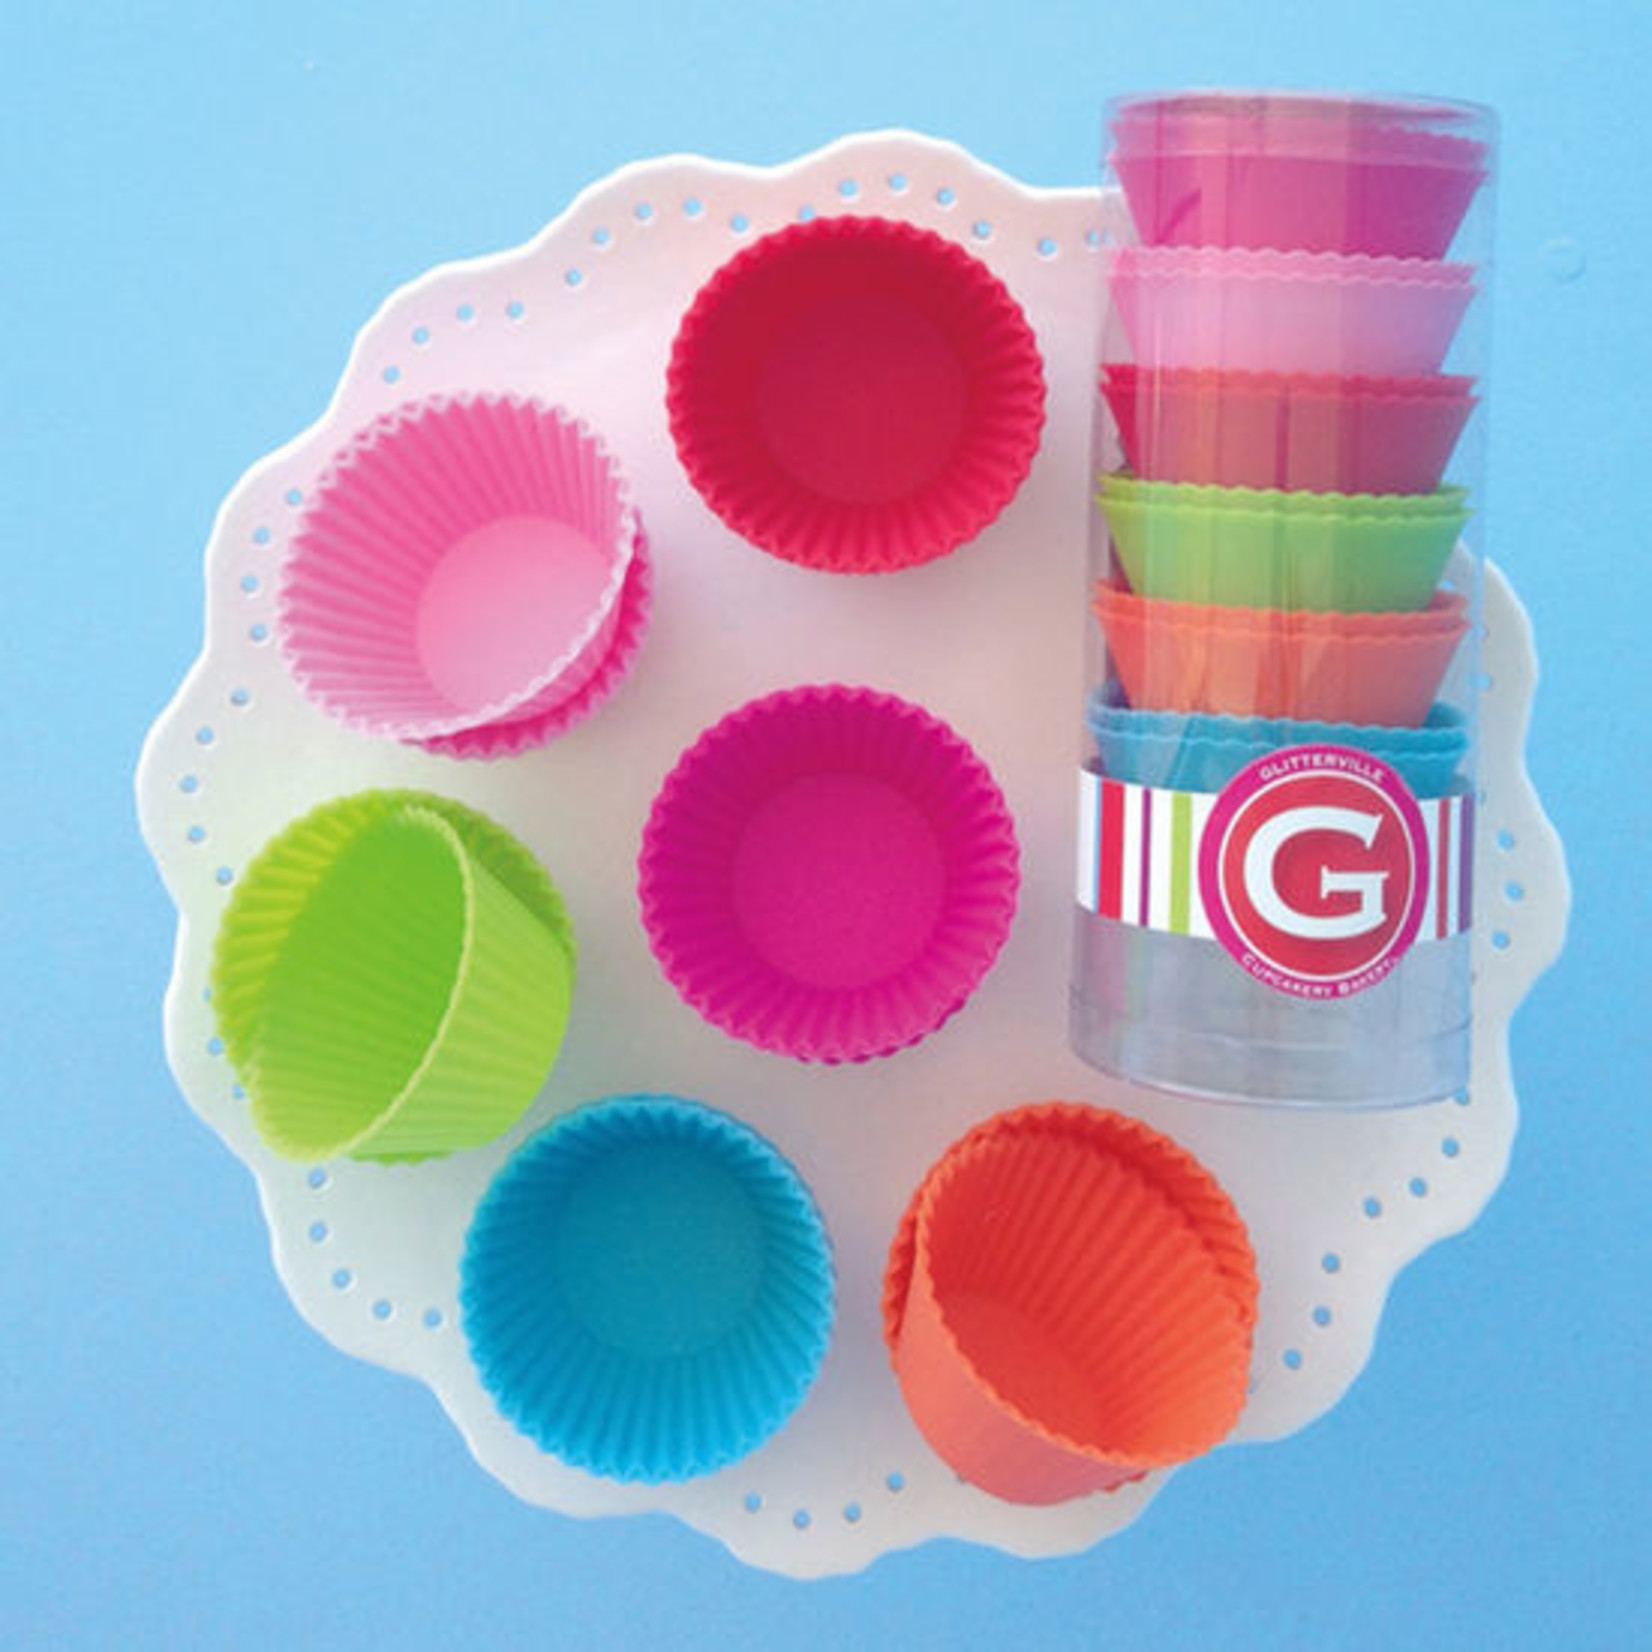 One Hundred 80 degrees Silicone Cupcake Liners - Set of 12